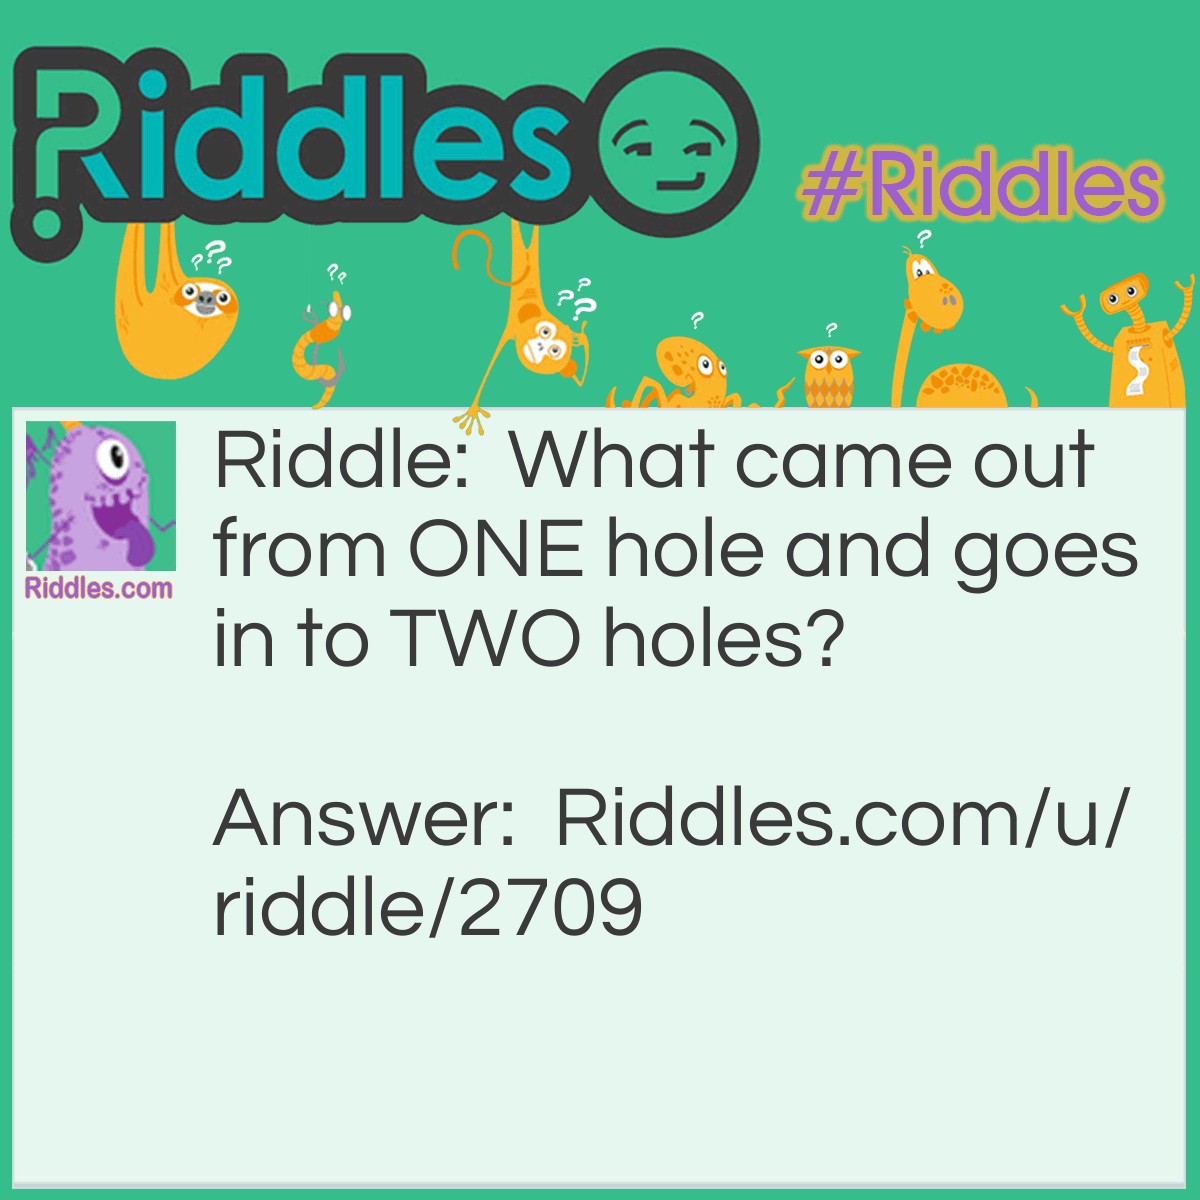 Riddle: What came out from ONE hole and goes in to TWO holes? Answer: Farts.